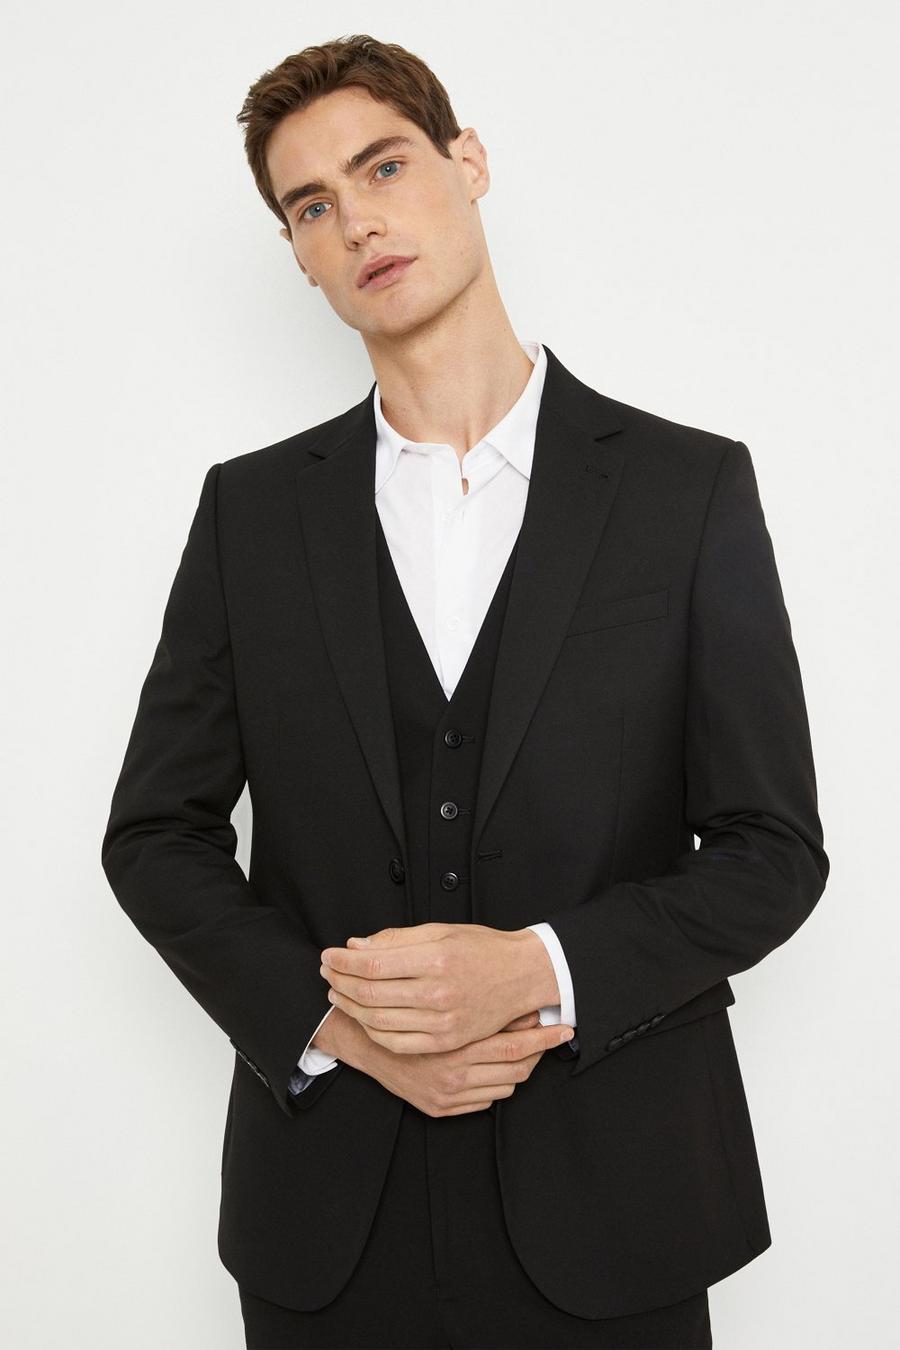 Plus And Tall Tailored Black Suit Jacket